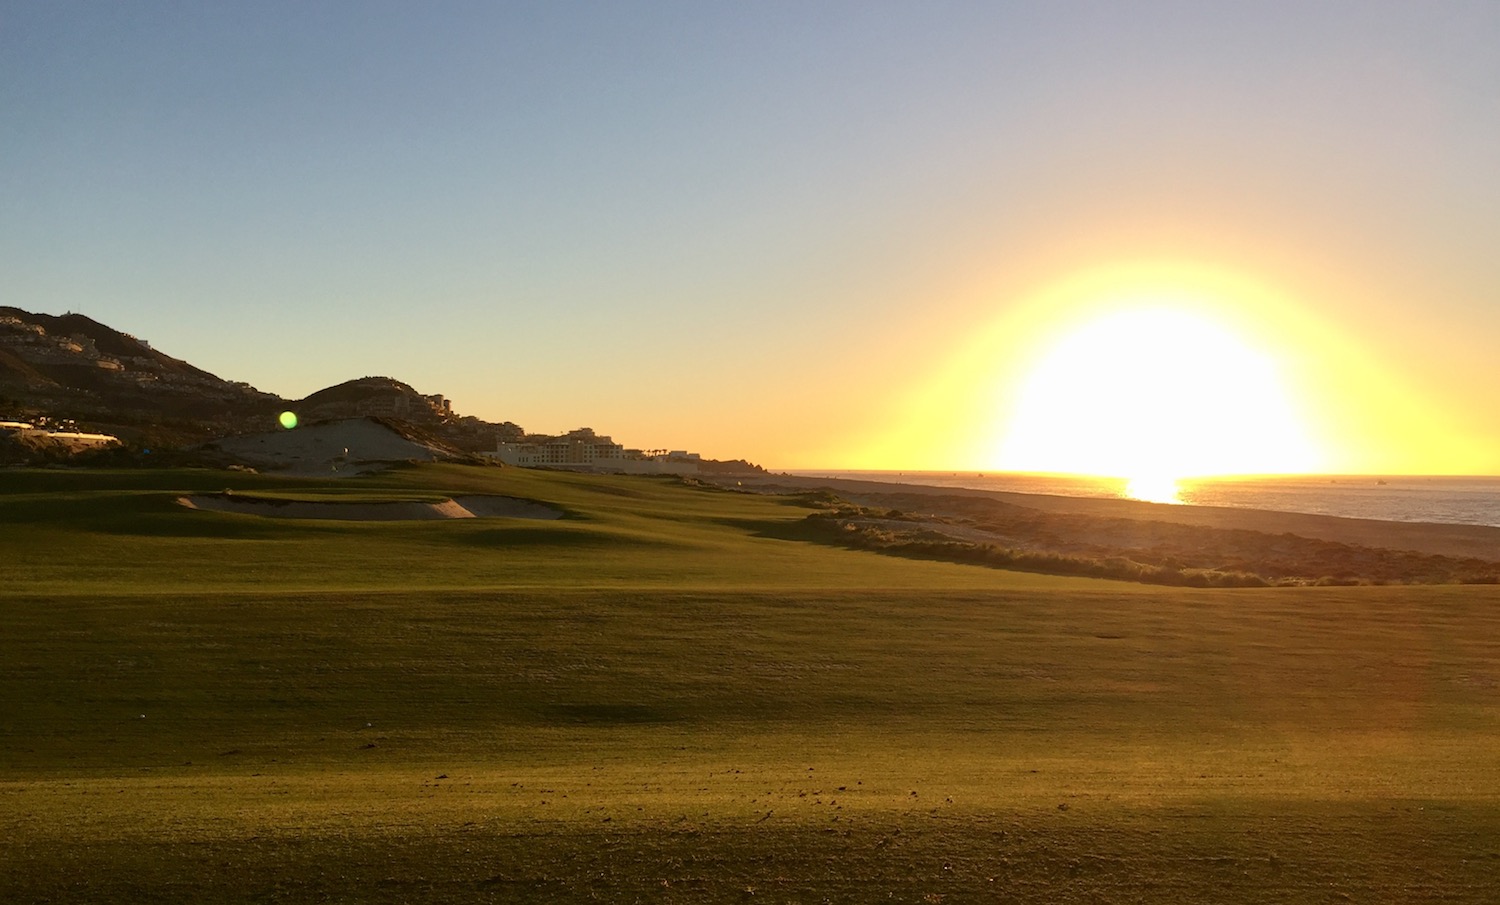 It's hard to beat a sunrise practice session at Quivira.